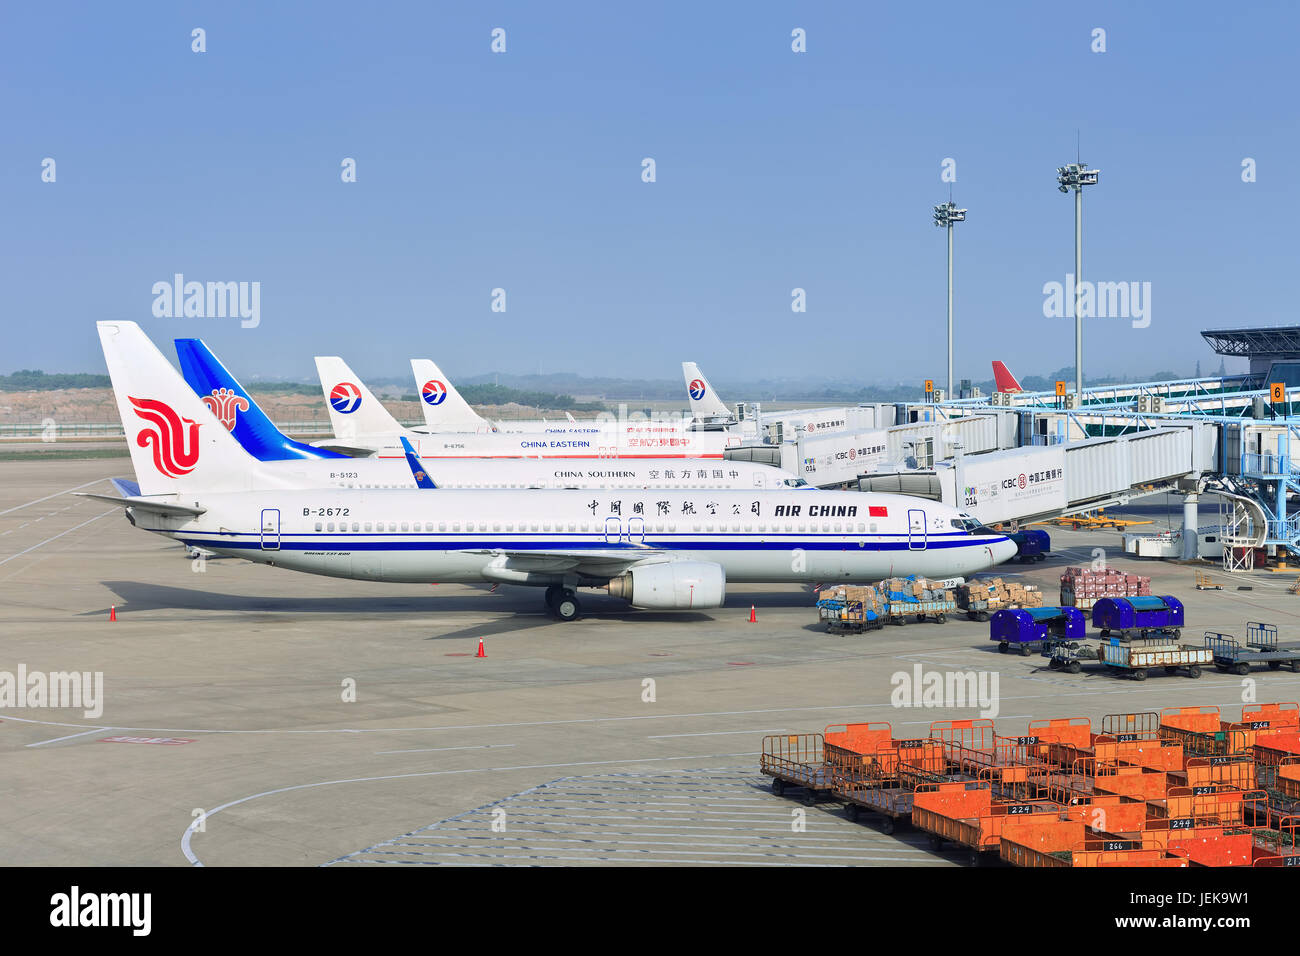 NANJING-MAY 27, 2014. Parked airplanes at Nanjing Lukou International Airport which consists of two terminals, two 3600m runways, two control towers. Stock Photo